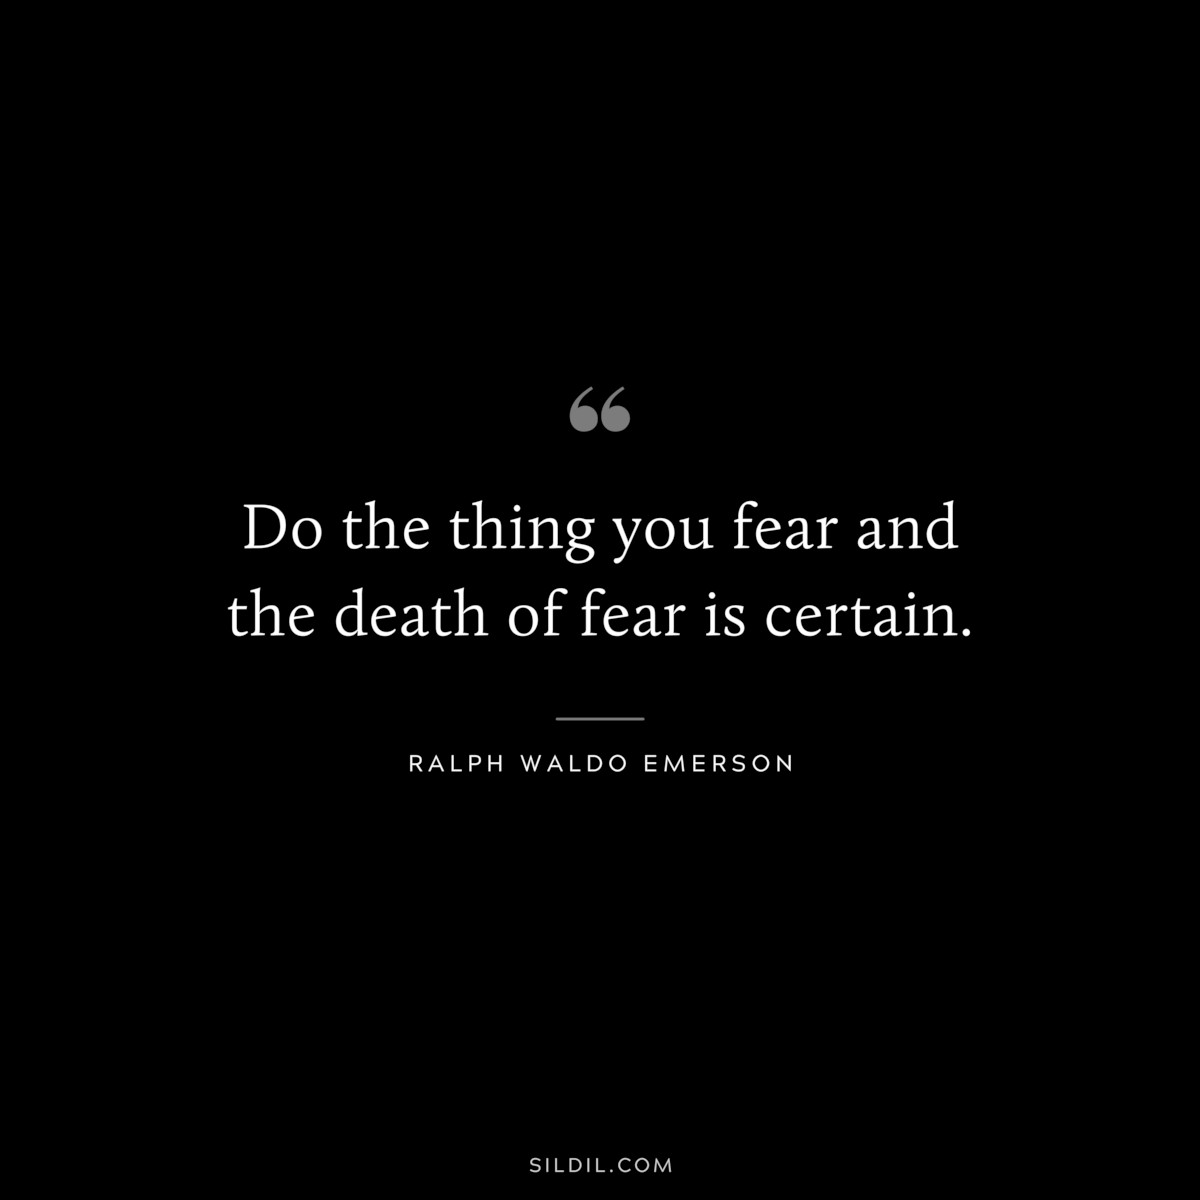 Do the thing you fear and the death of fear is certain. ― Ralph Waldo Emerson